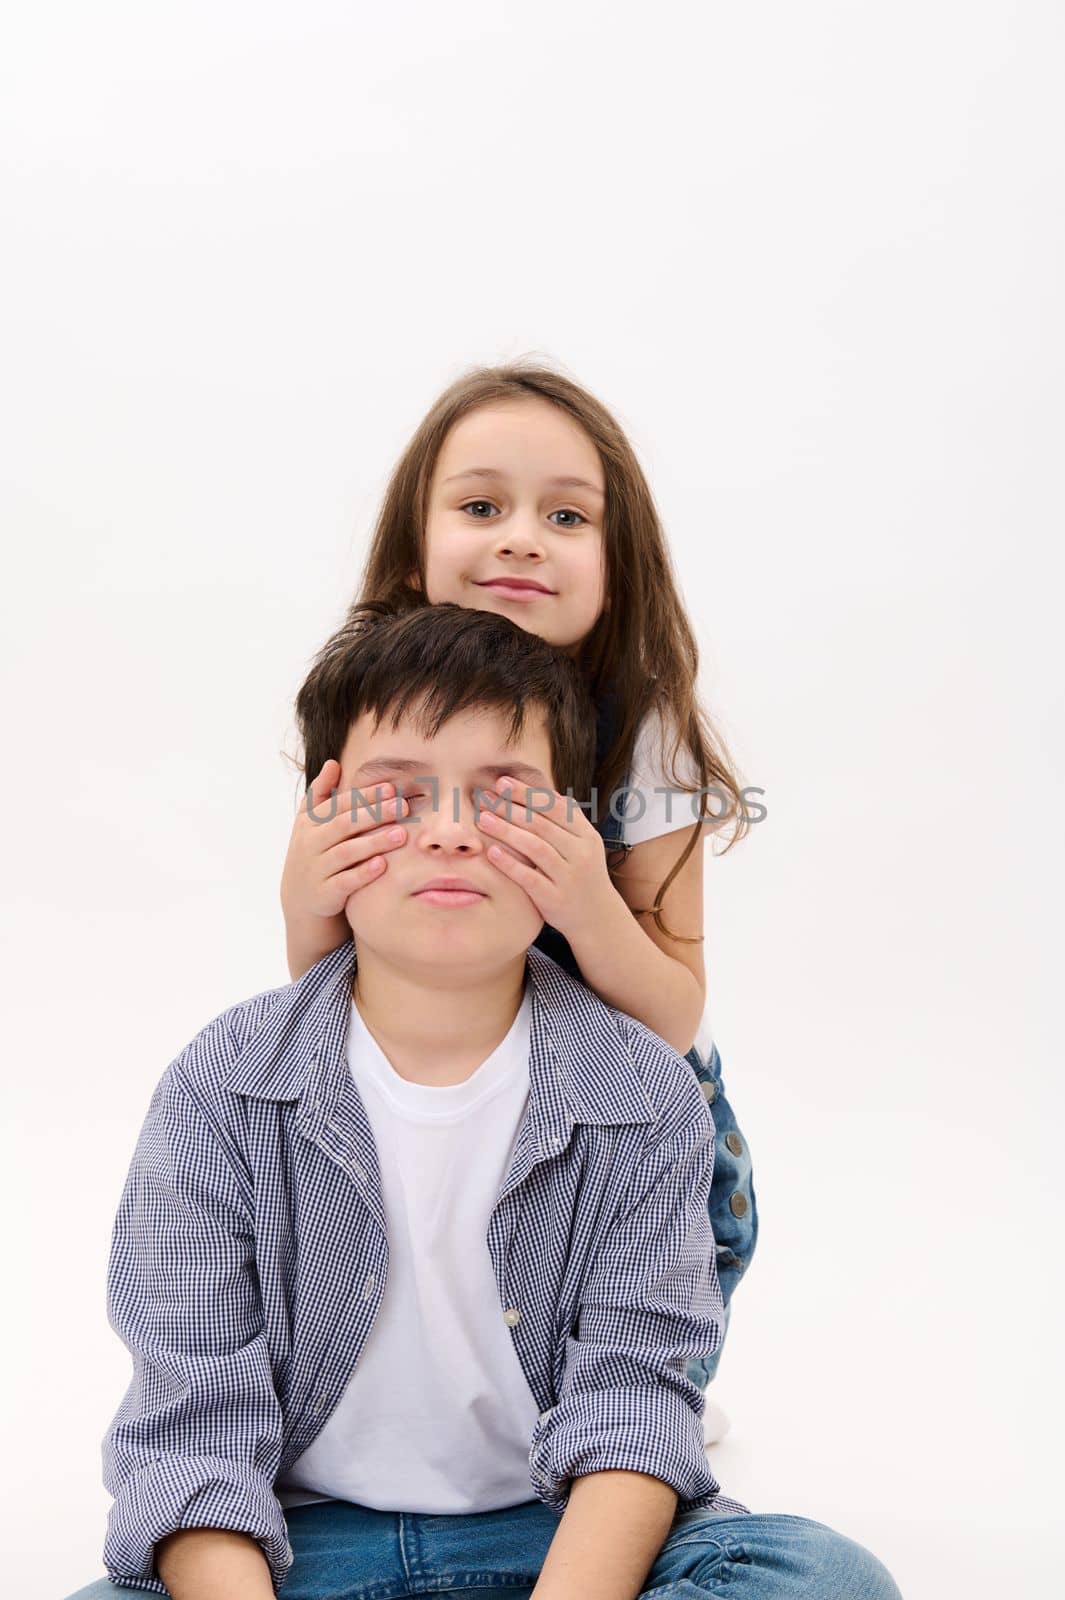 Lovely baby girl - little sister hugging her brother - a teenage boy - from the back, isolated over white background. International Children's Day celebration. Kids rights. Happy family relationships